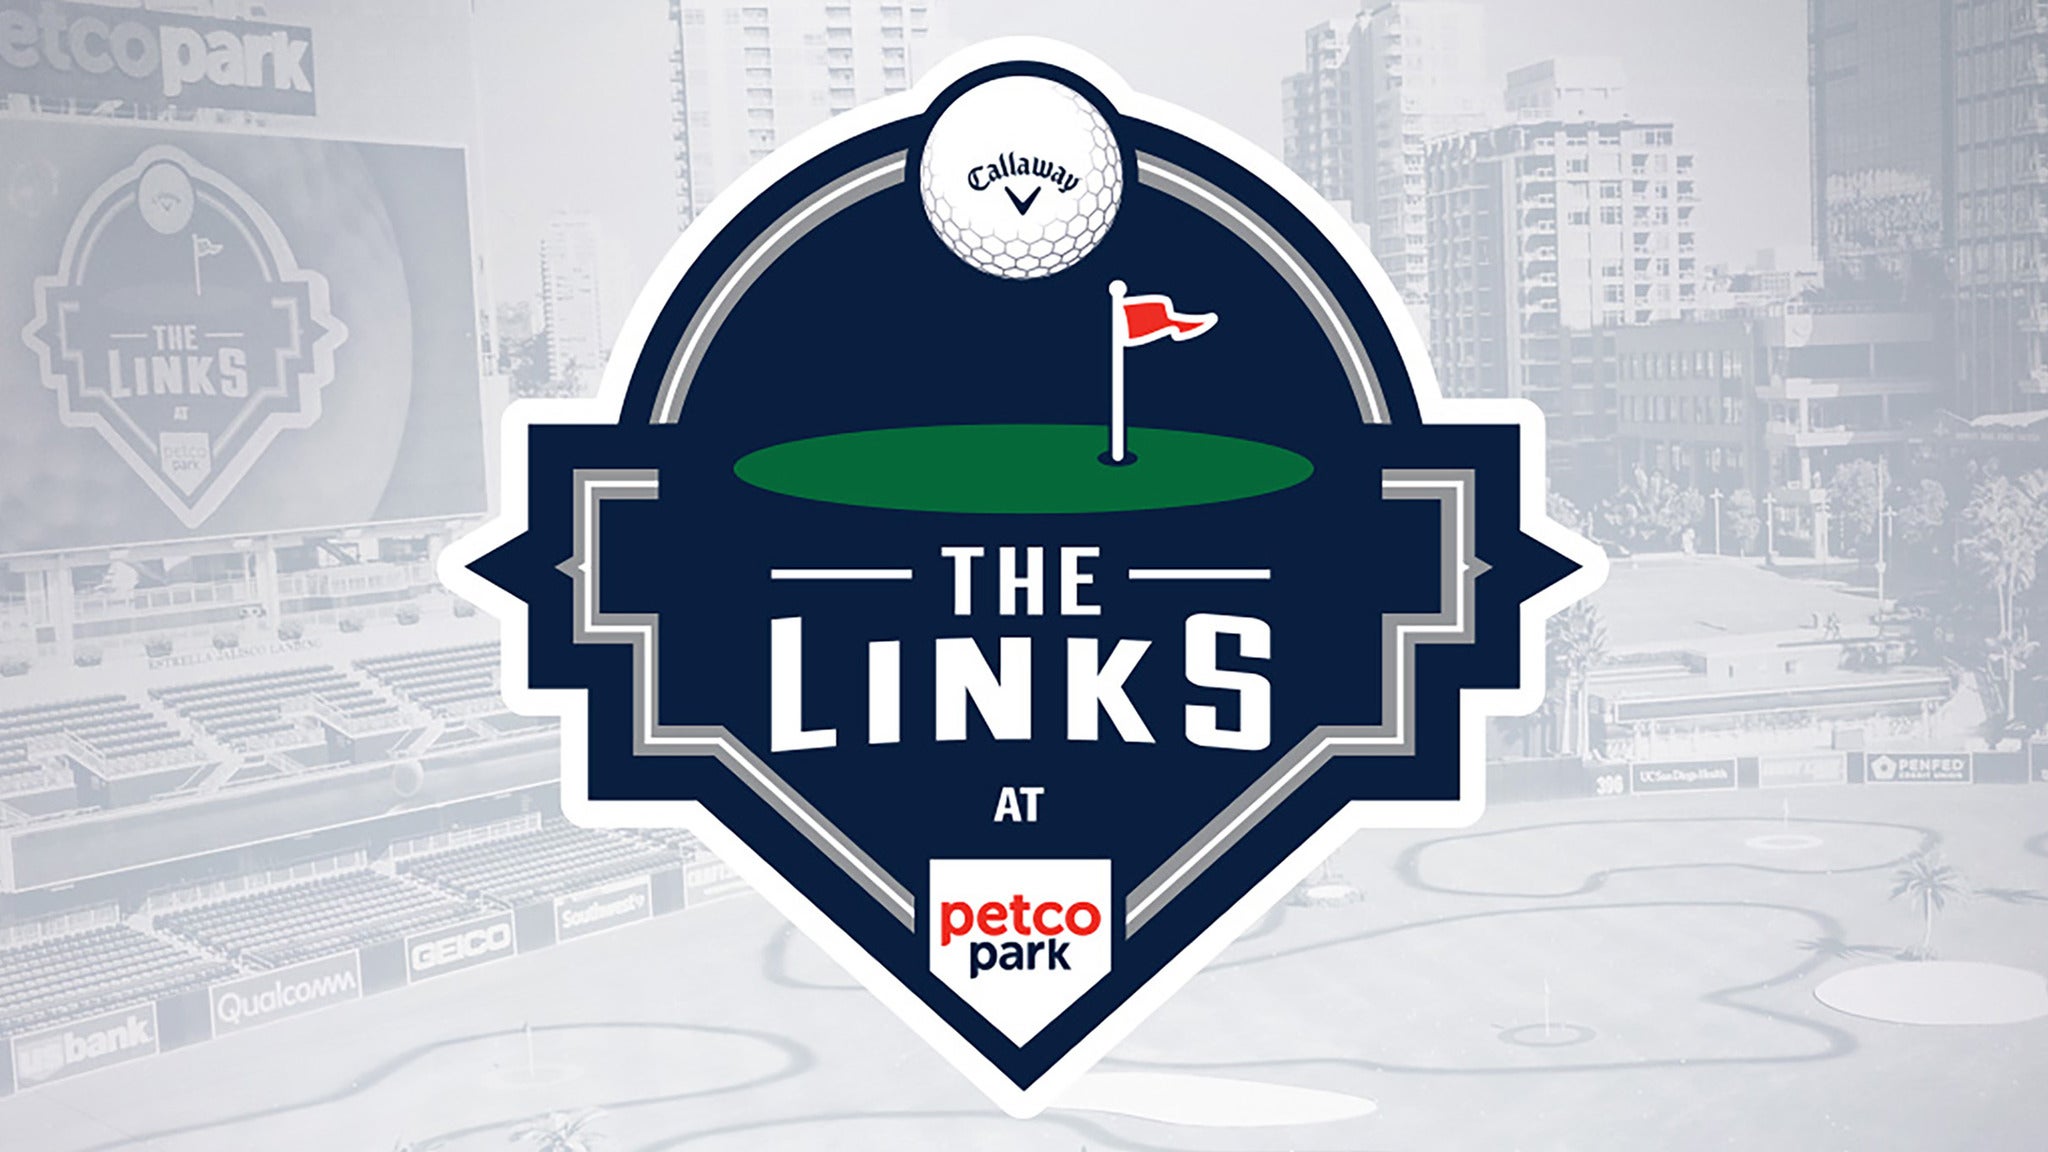 The Links at Petco Park in San Diego event information